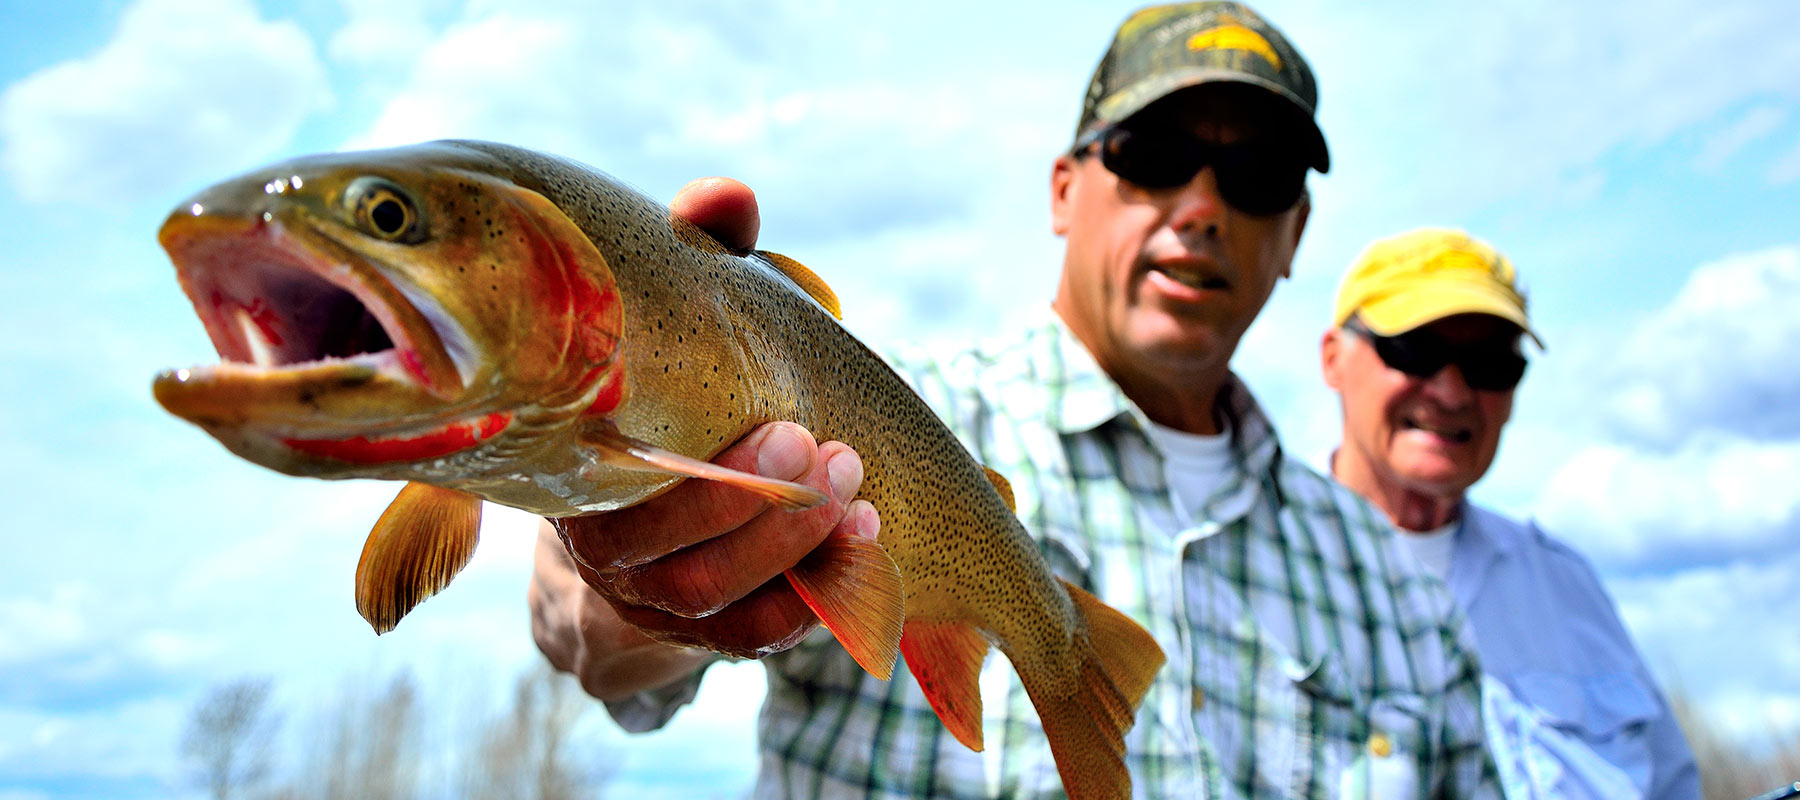 Magins Fishing Guides in Jackson Hole, Wyoming